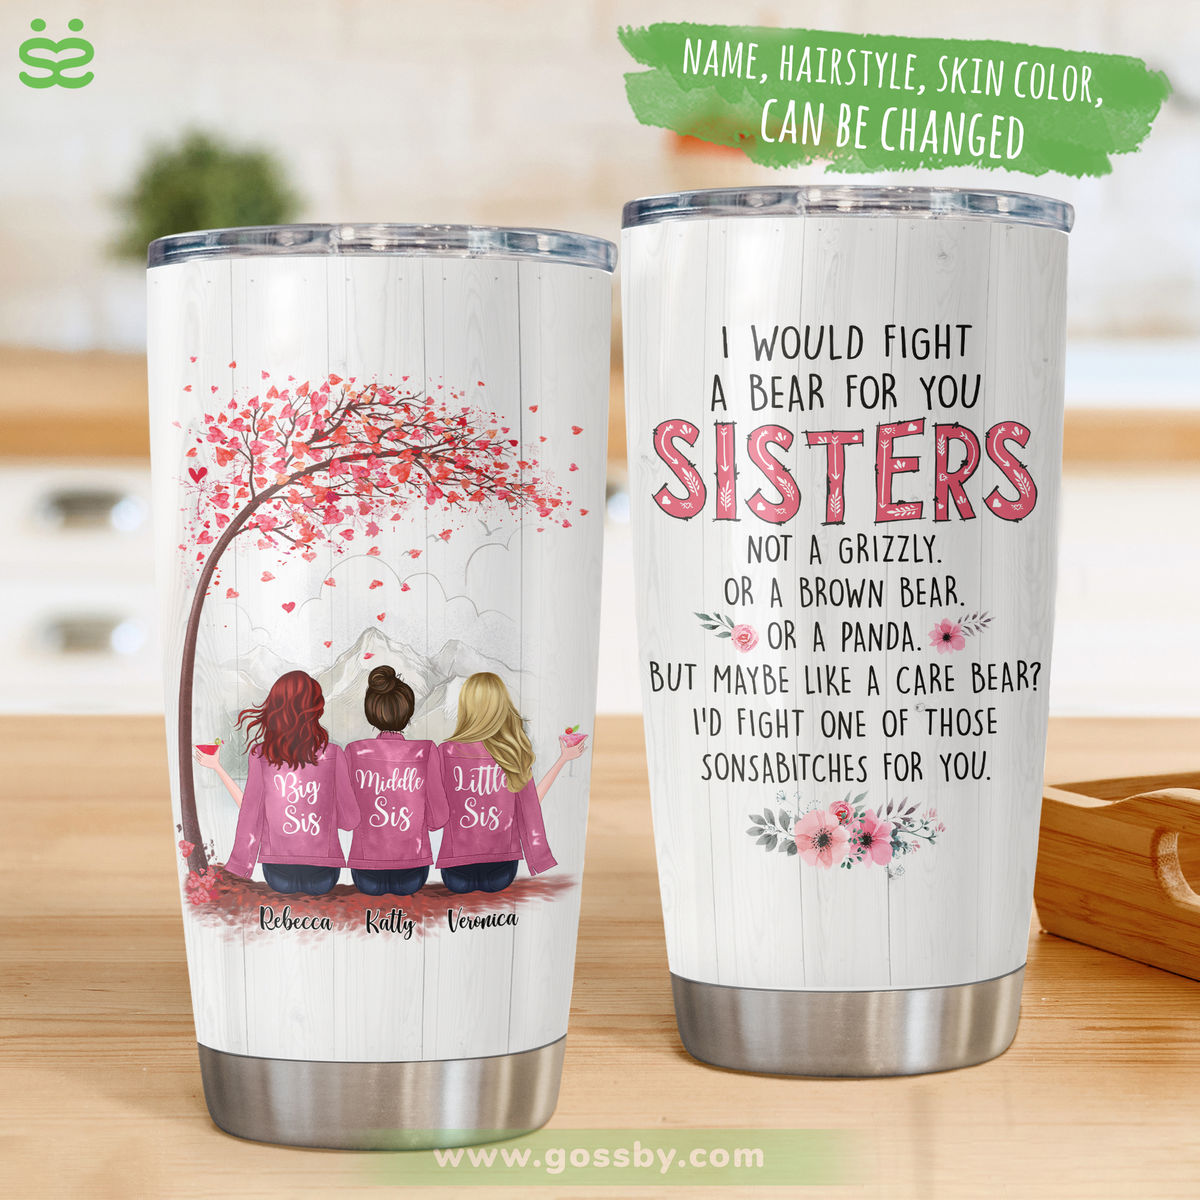 Up to 6 Sistes - I Would Fight A Bear For You Sisters ... (5222) - Personalized Tumbler